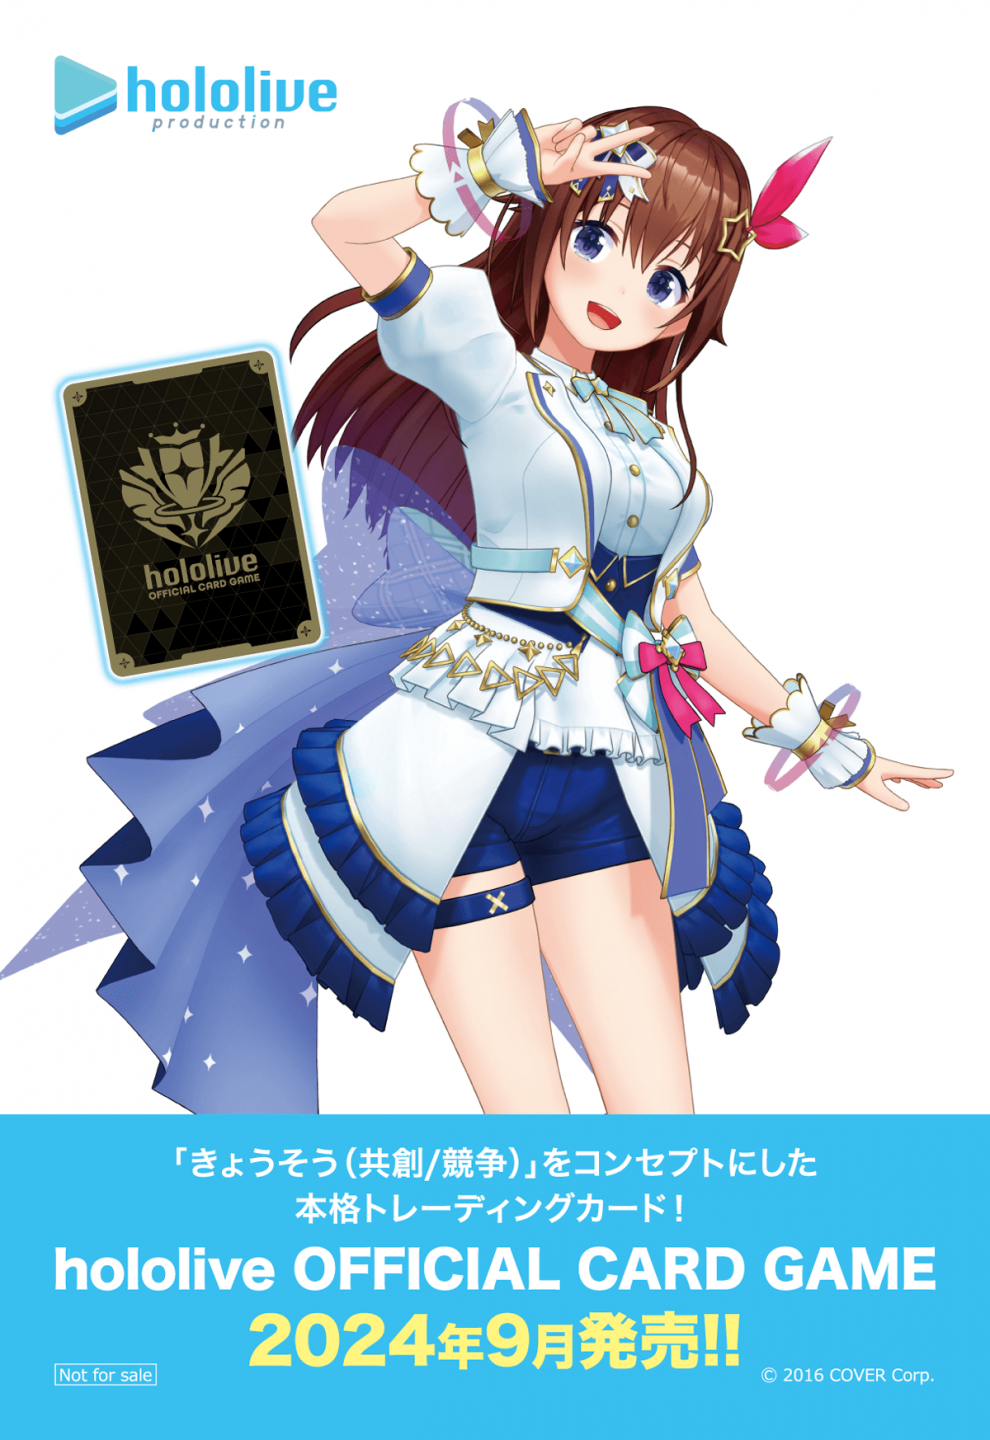 hololive OFFICIAL CARD GAME』カードショップ先行体験会 | イベント 